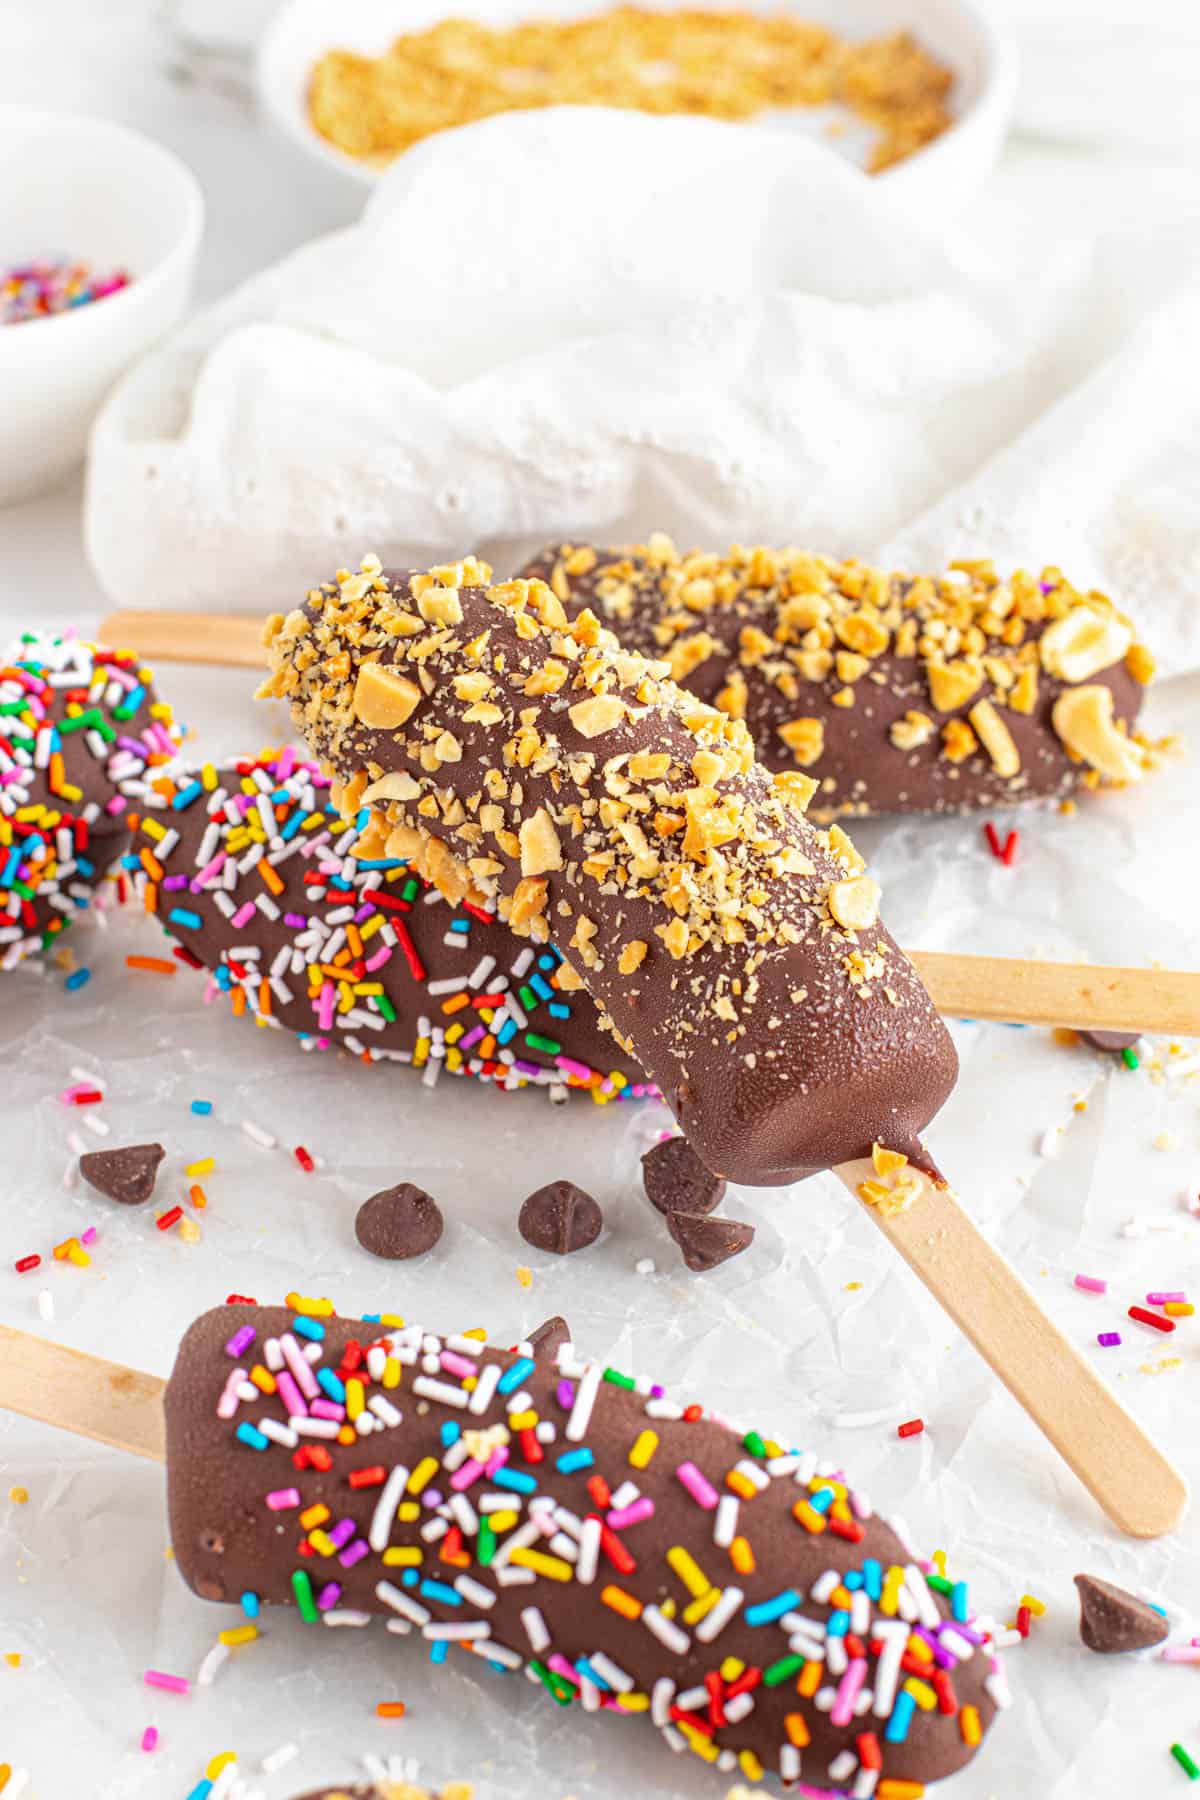 Chocolate covered bananas on sticks decorated with various toppings.